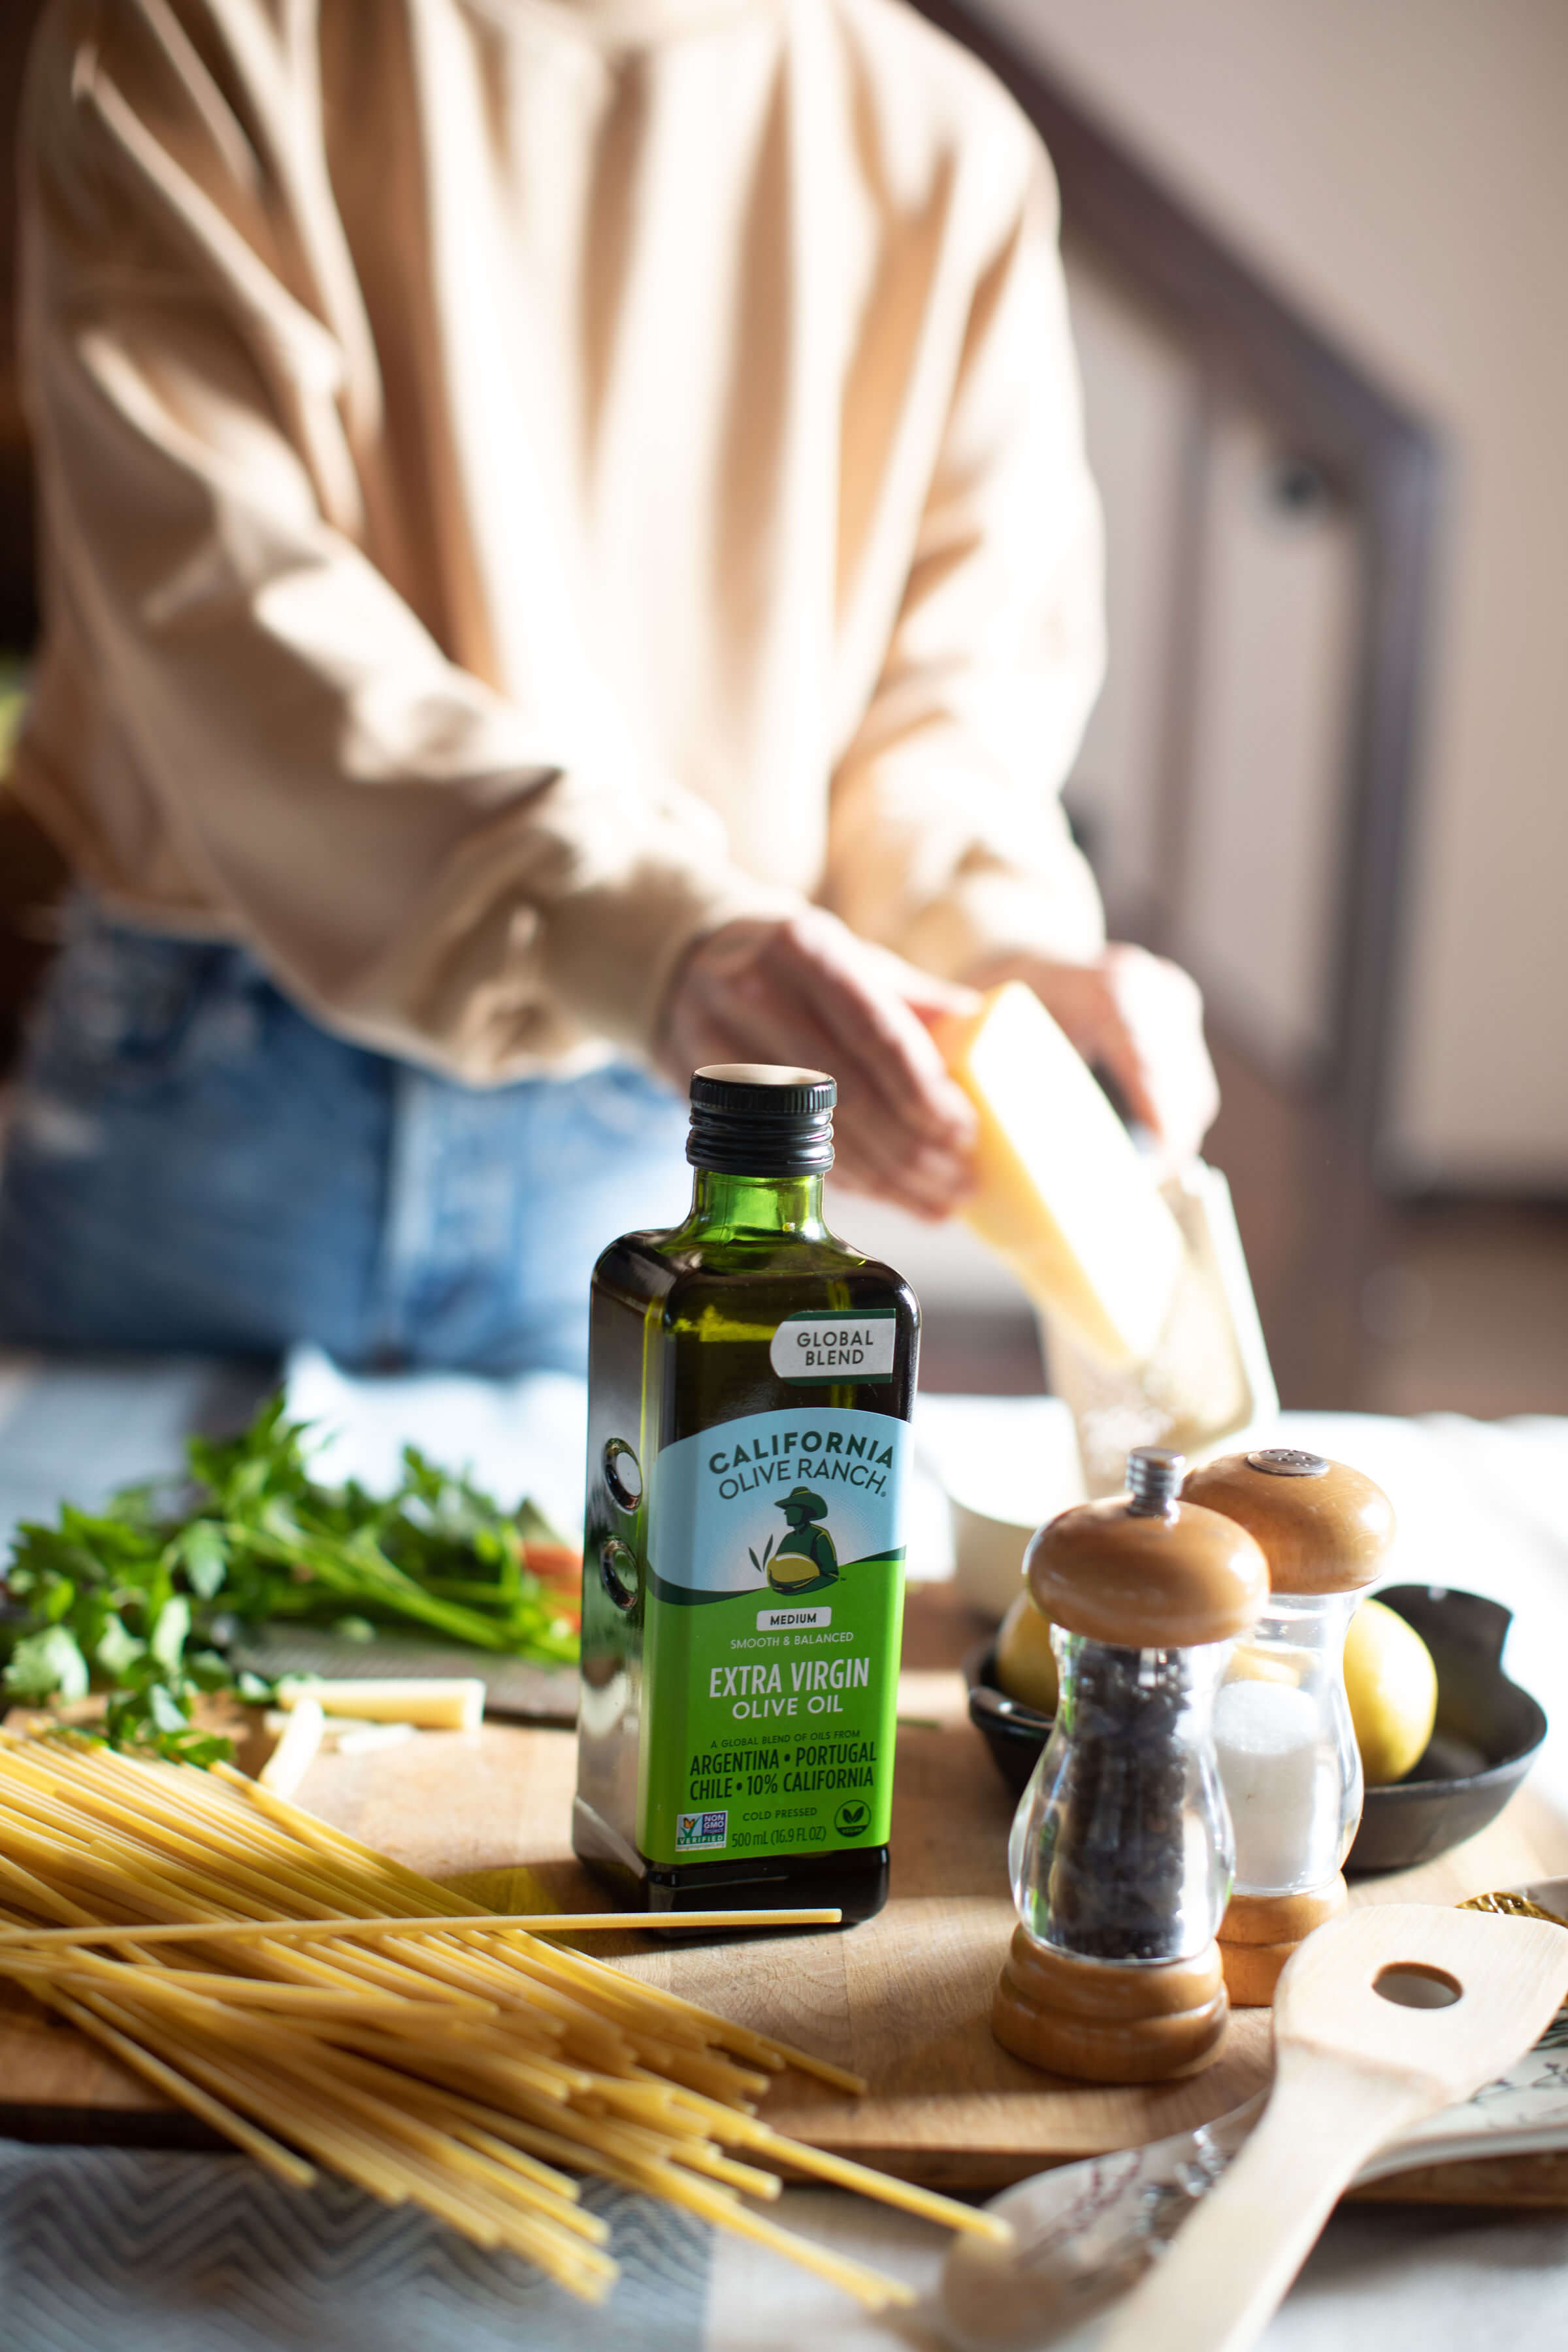 Email and SMS Campaigns Generate 94%+ Revenue Increase for Leading Olive Oil Brand